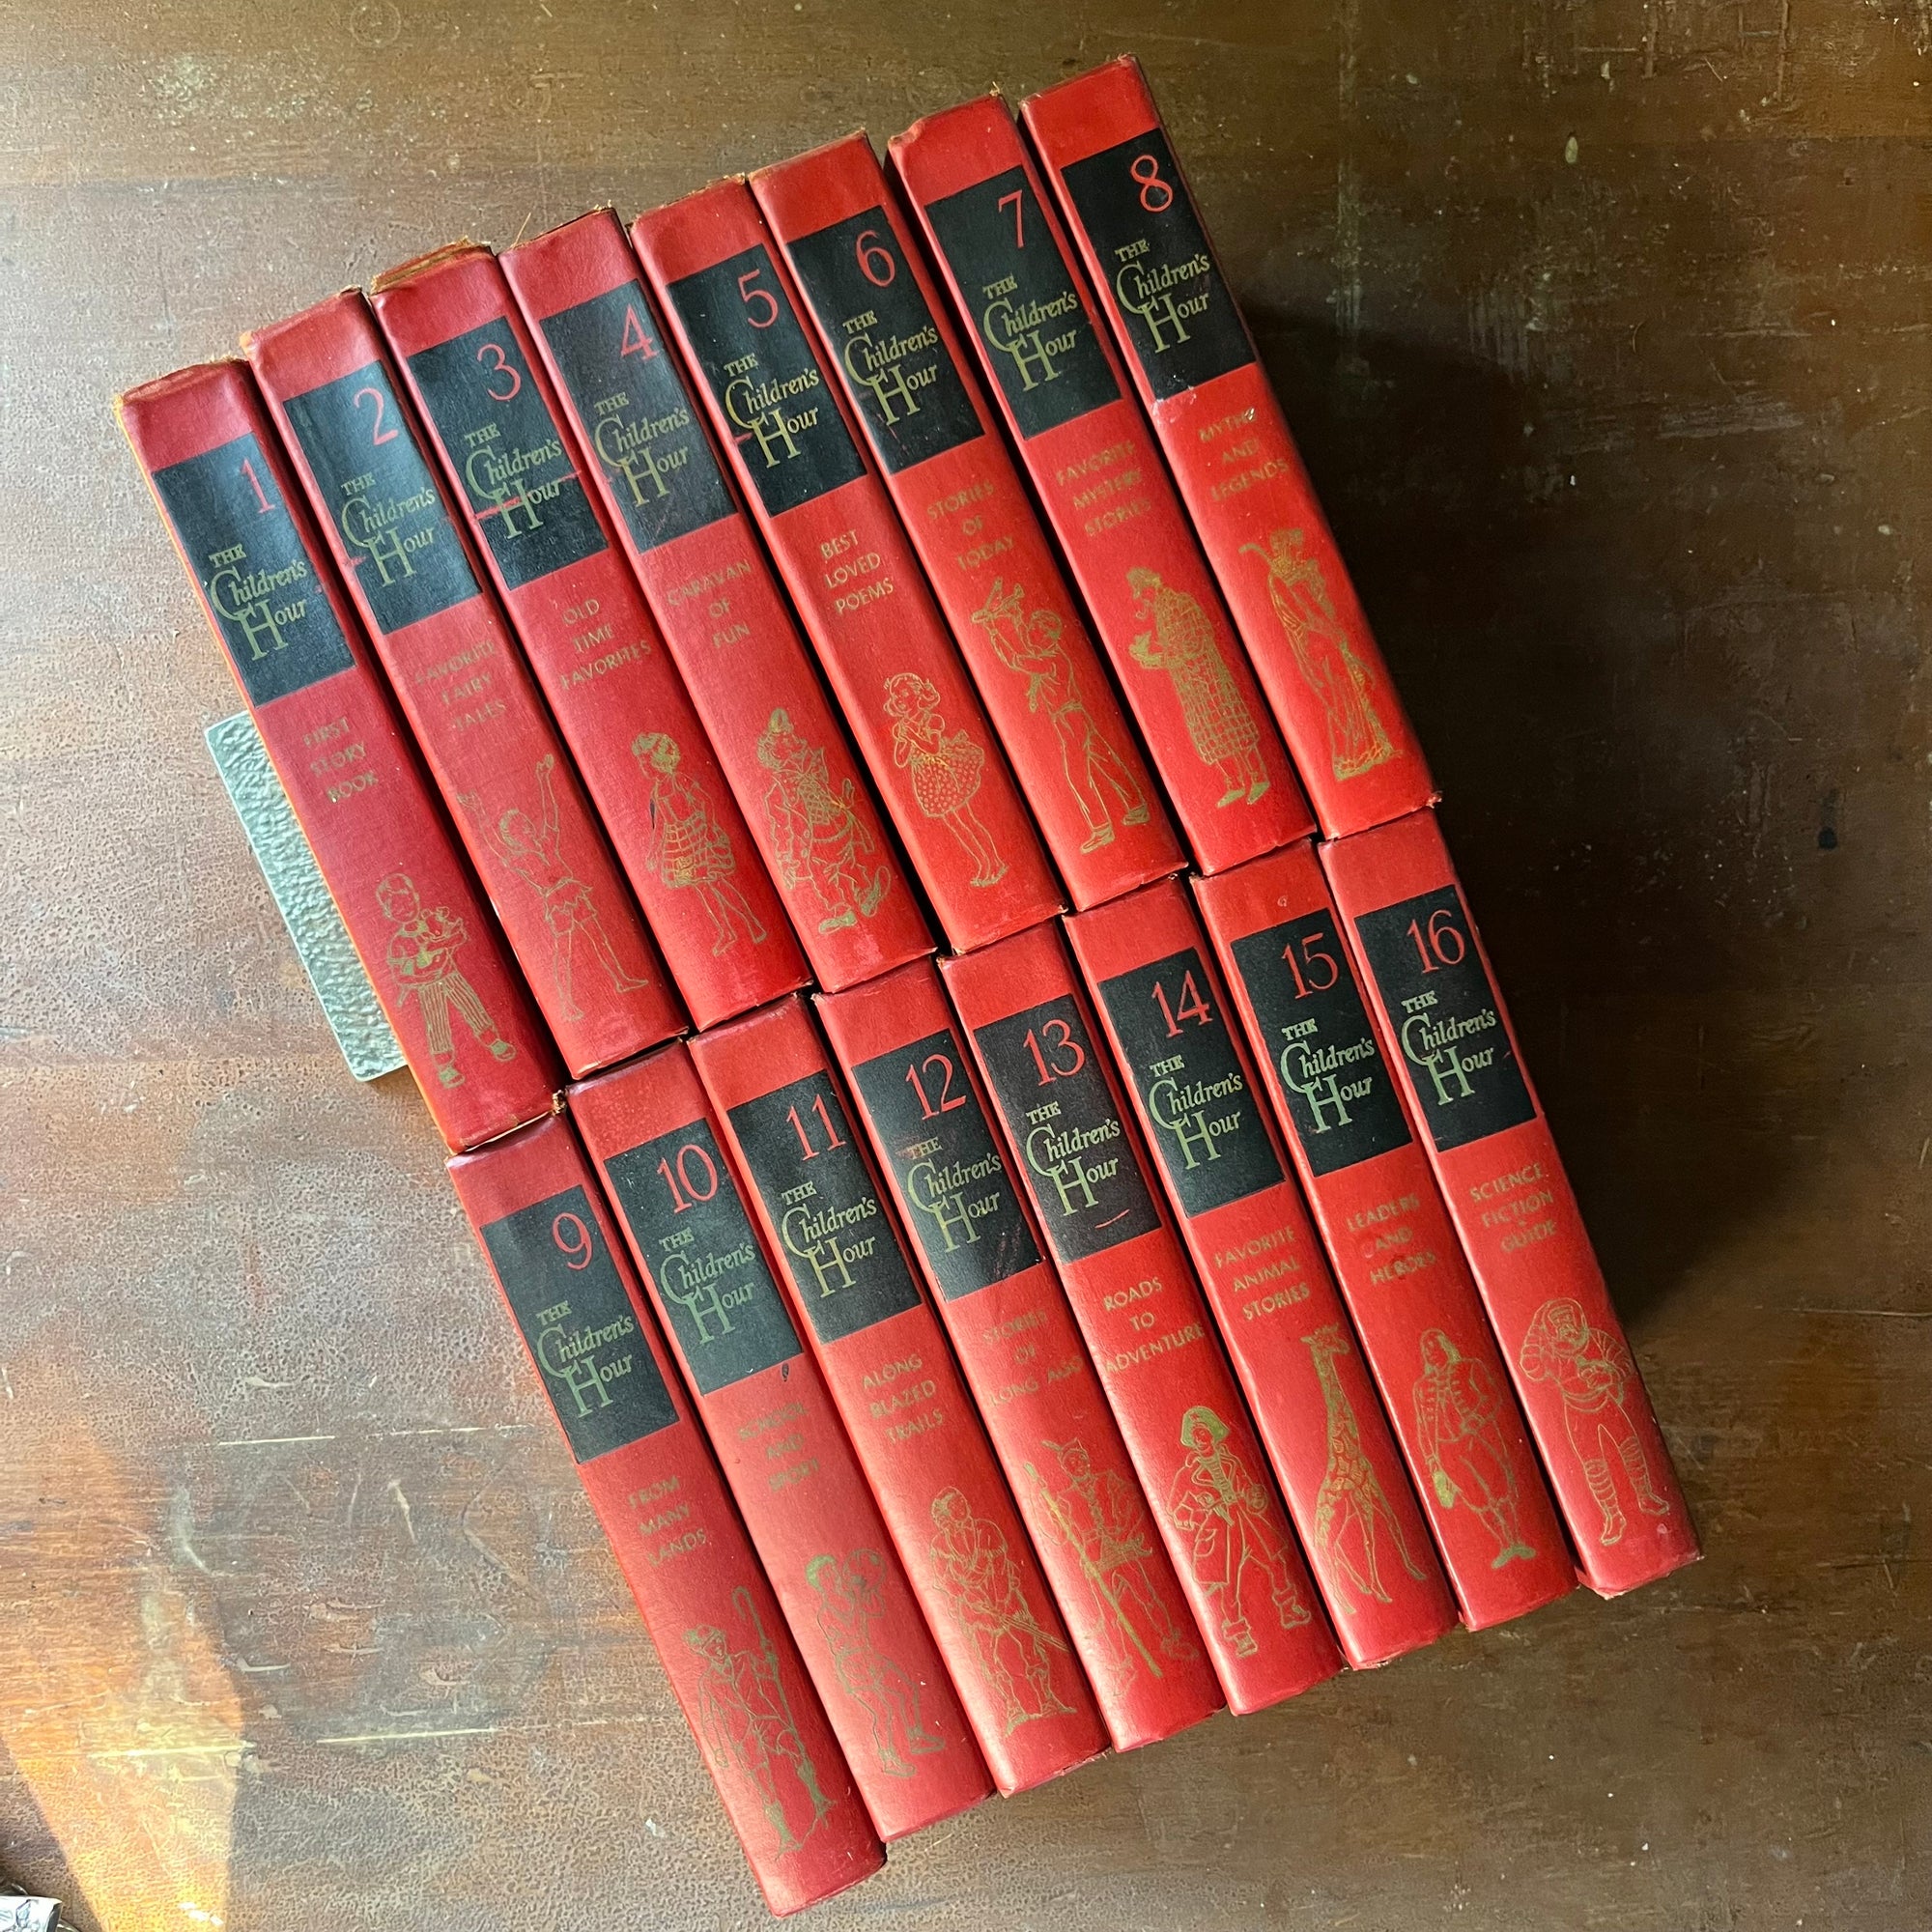 vintage children's storybook set - The Children's Hour Complete 16 Volume Book Set - view of the spines with an image on each under the name of the series & name of the volume